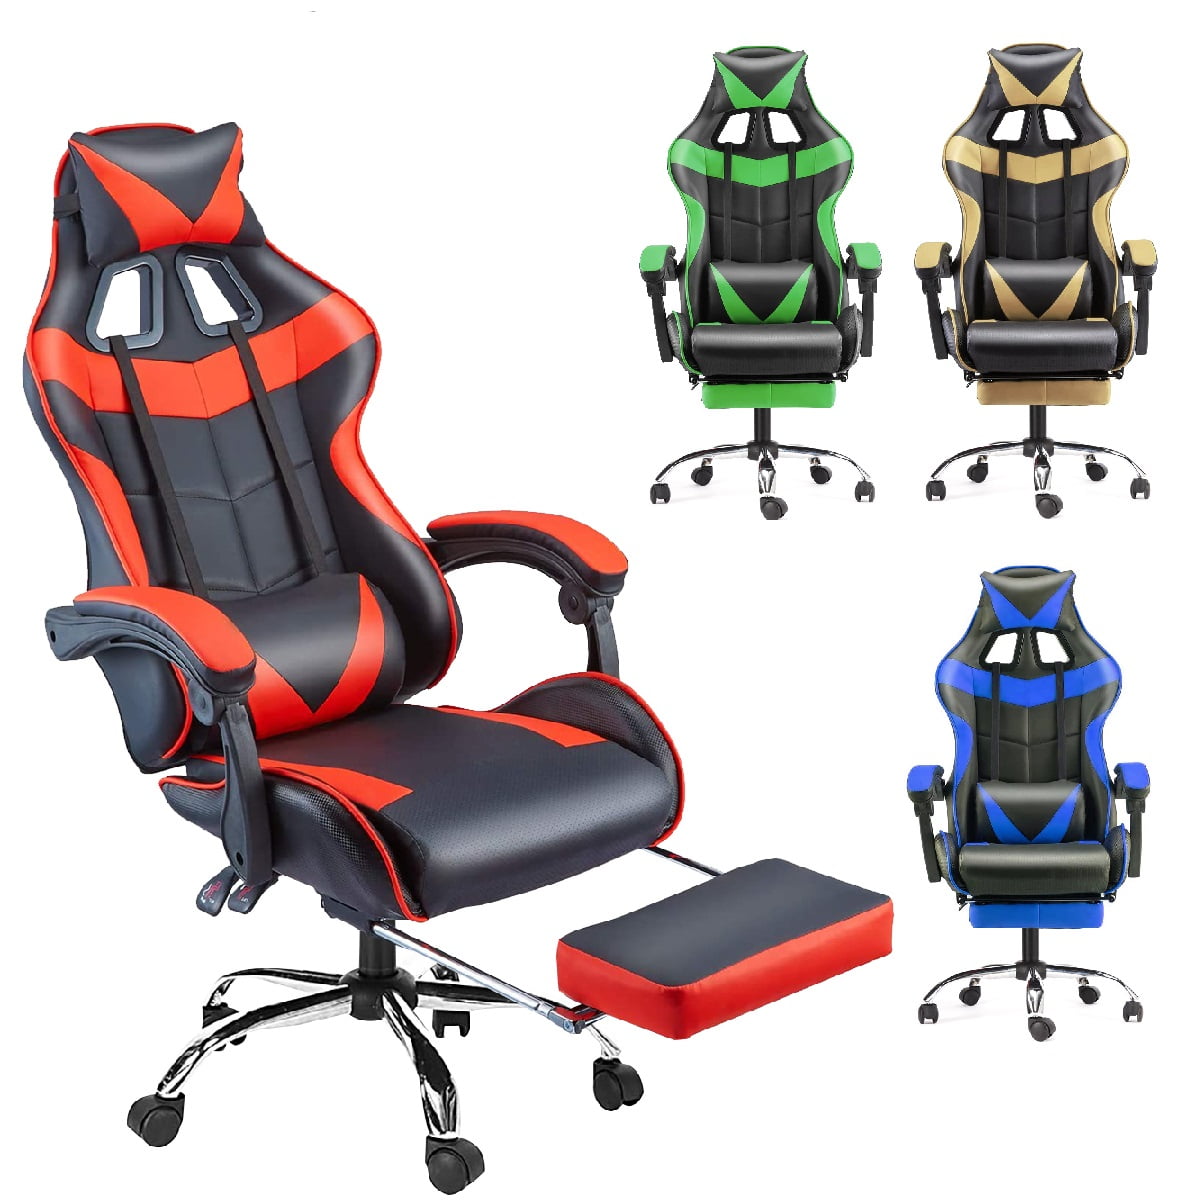 Black PC Gaming Chair for Adults, Large Size High Back Computer Desk